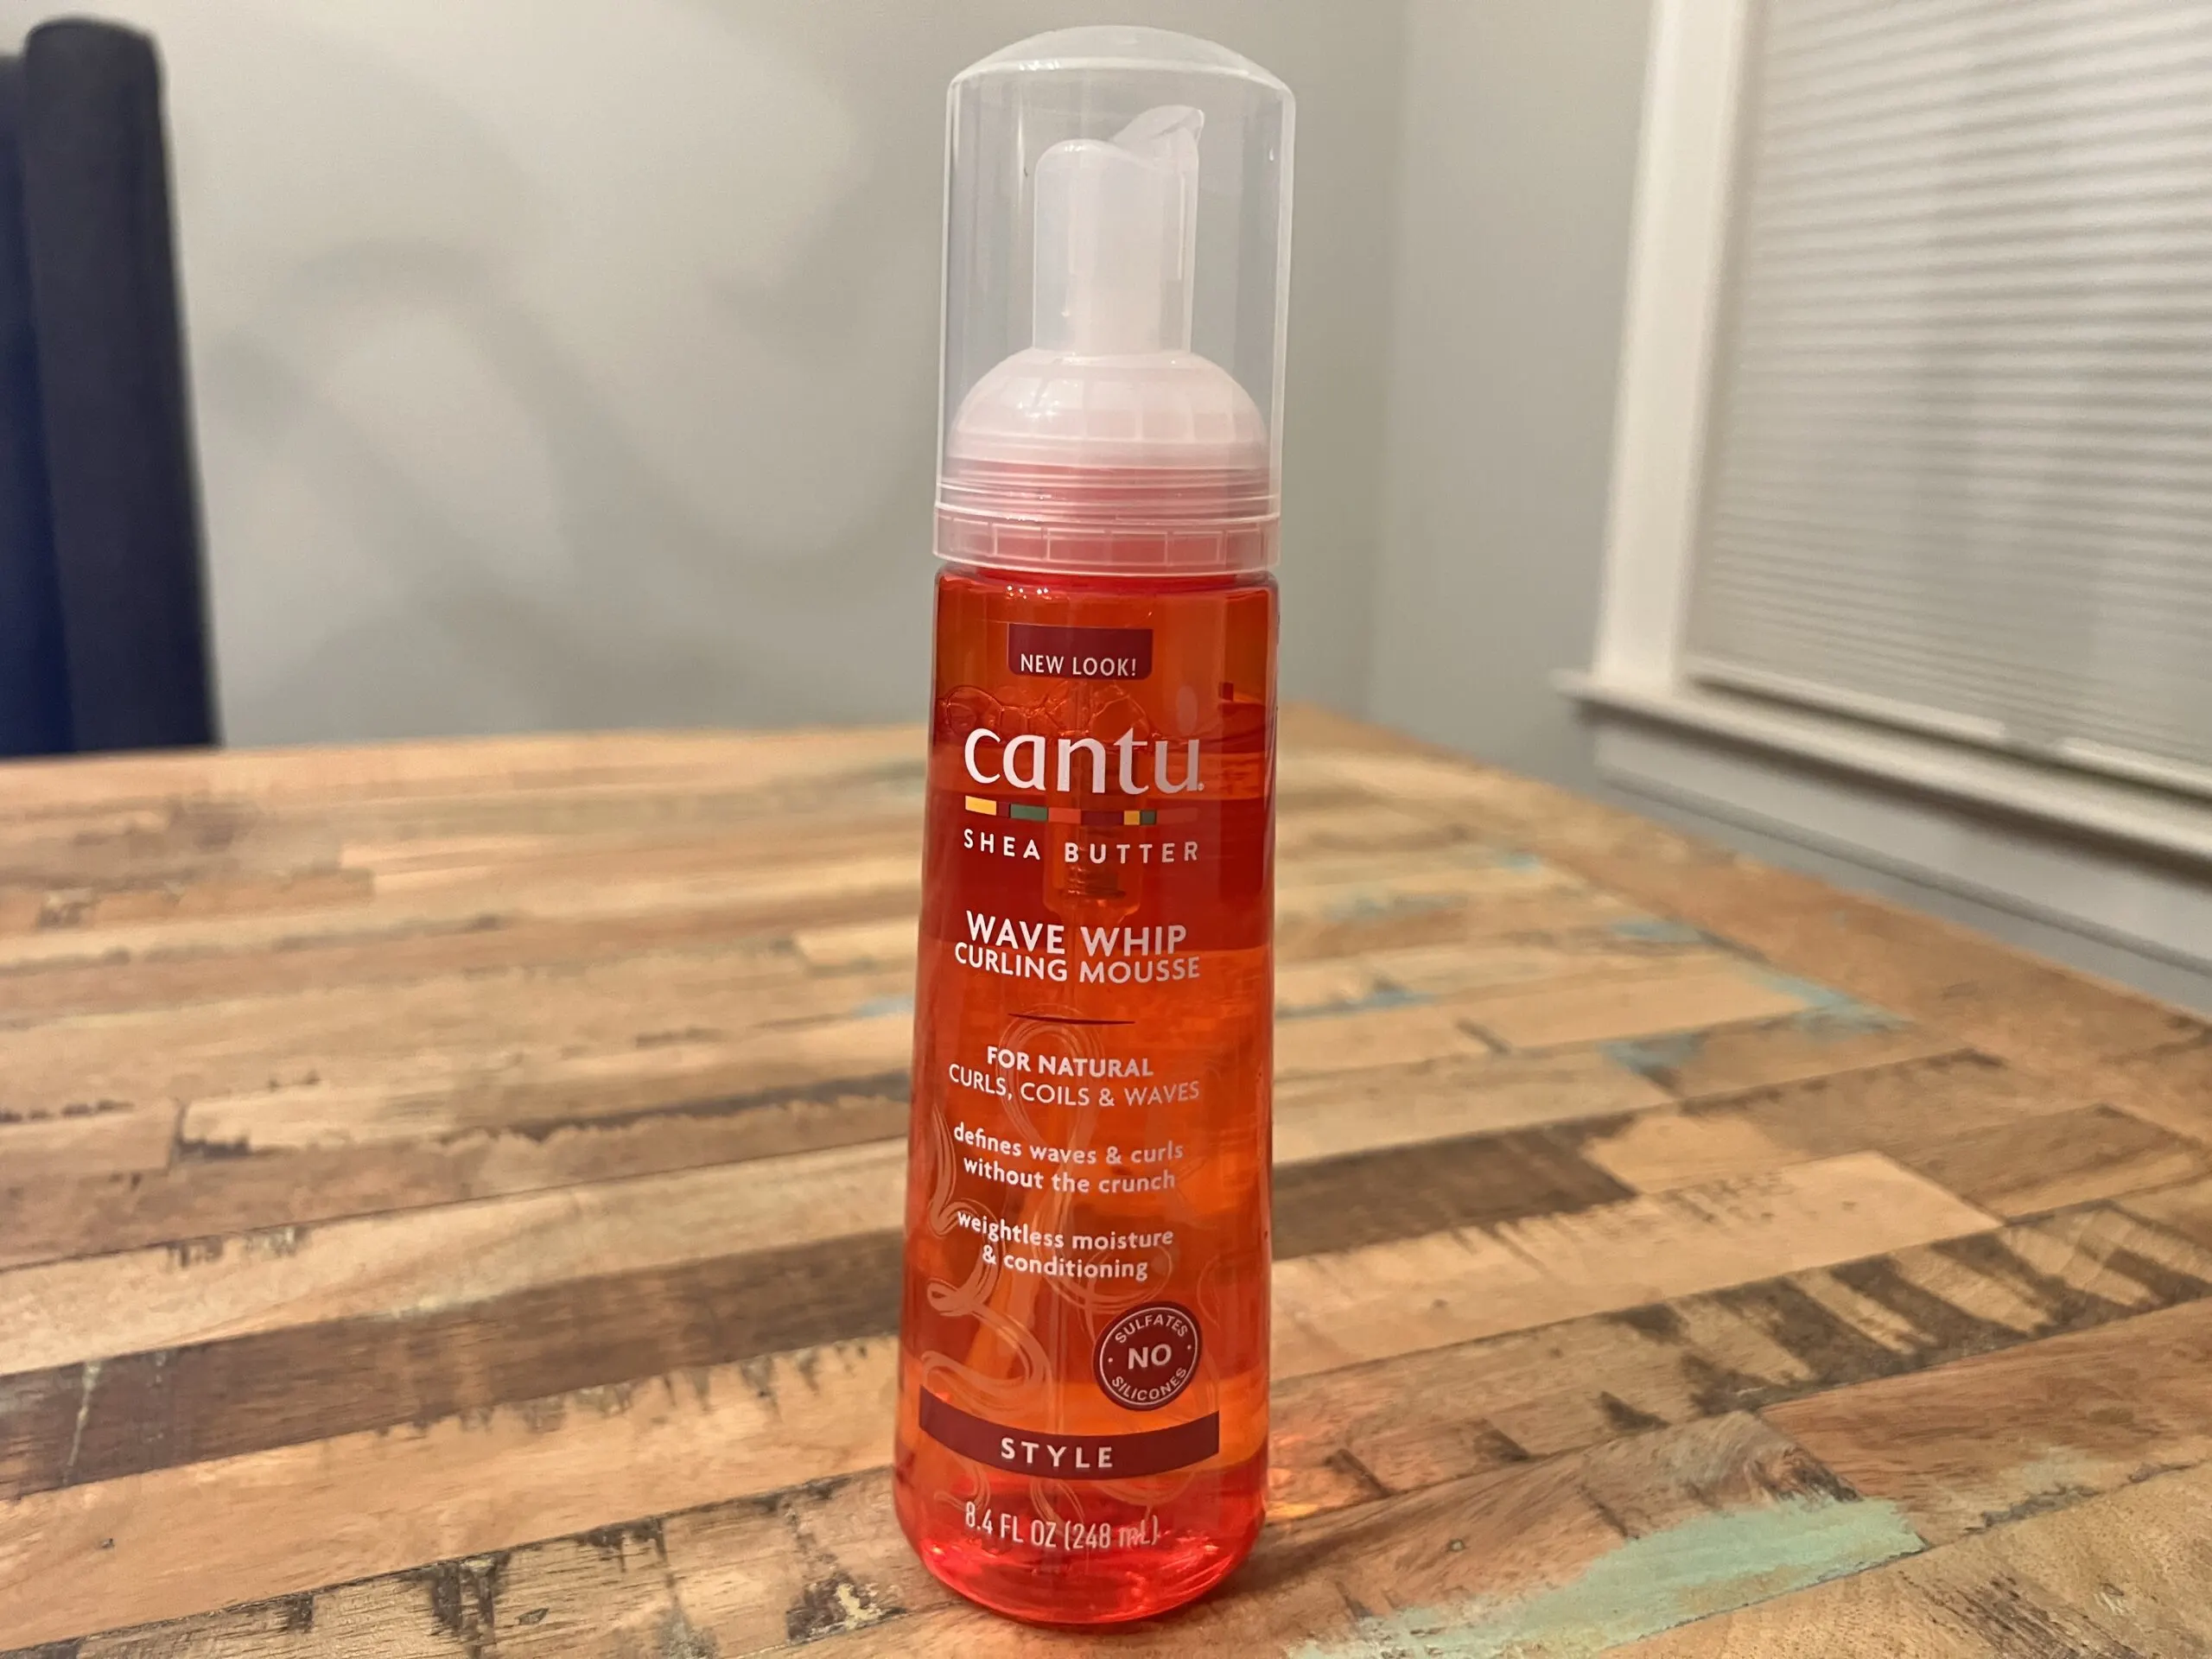 Cantu Shea Butter Wave Whip Curling Mousse can, formulated to define and enhance natural curl patterns.